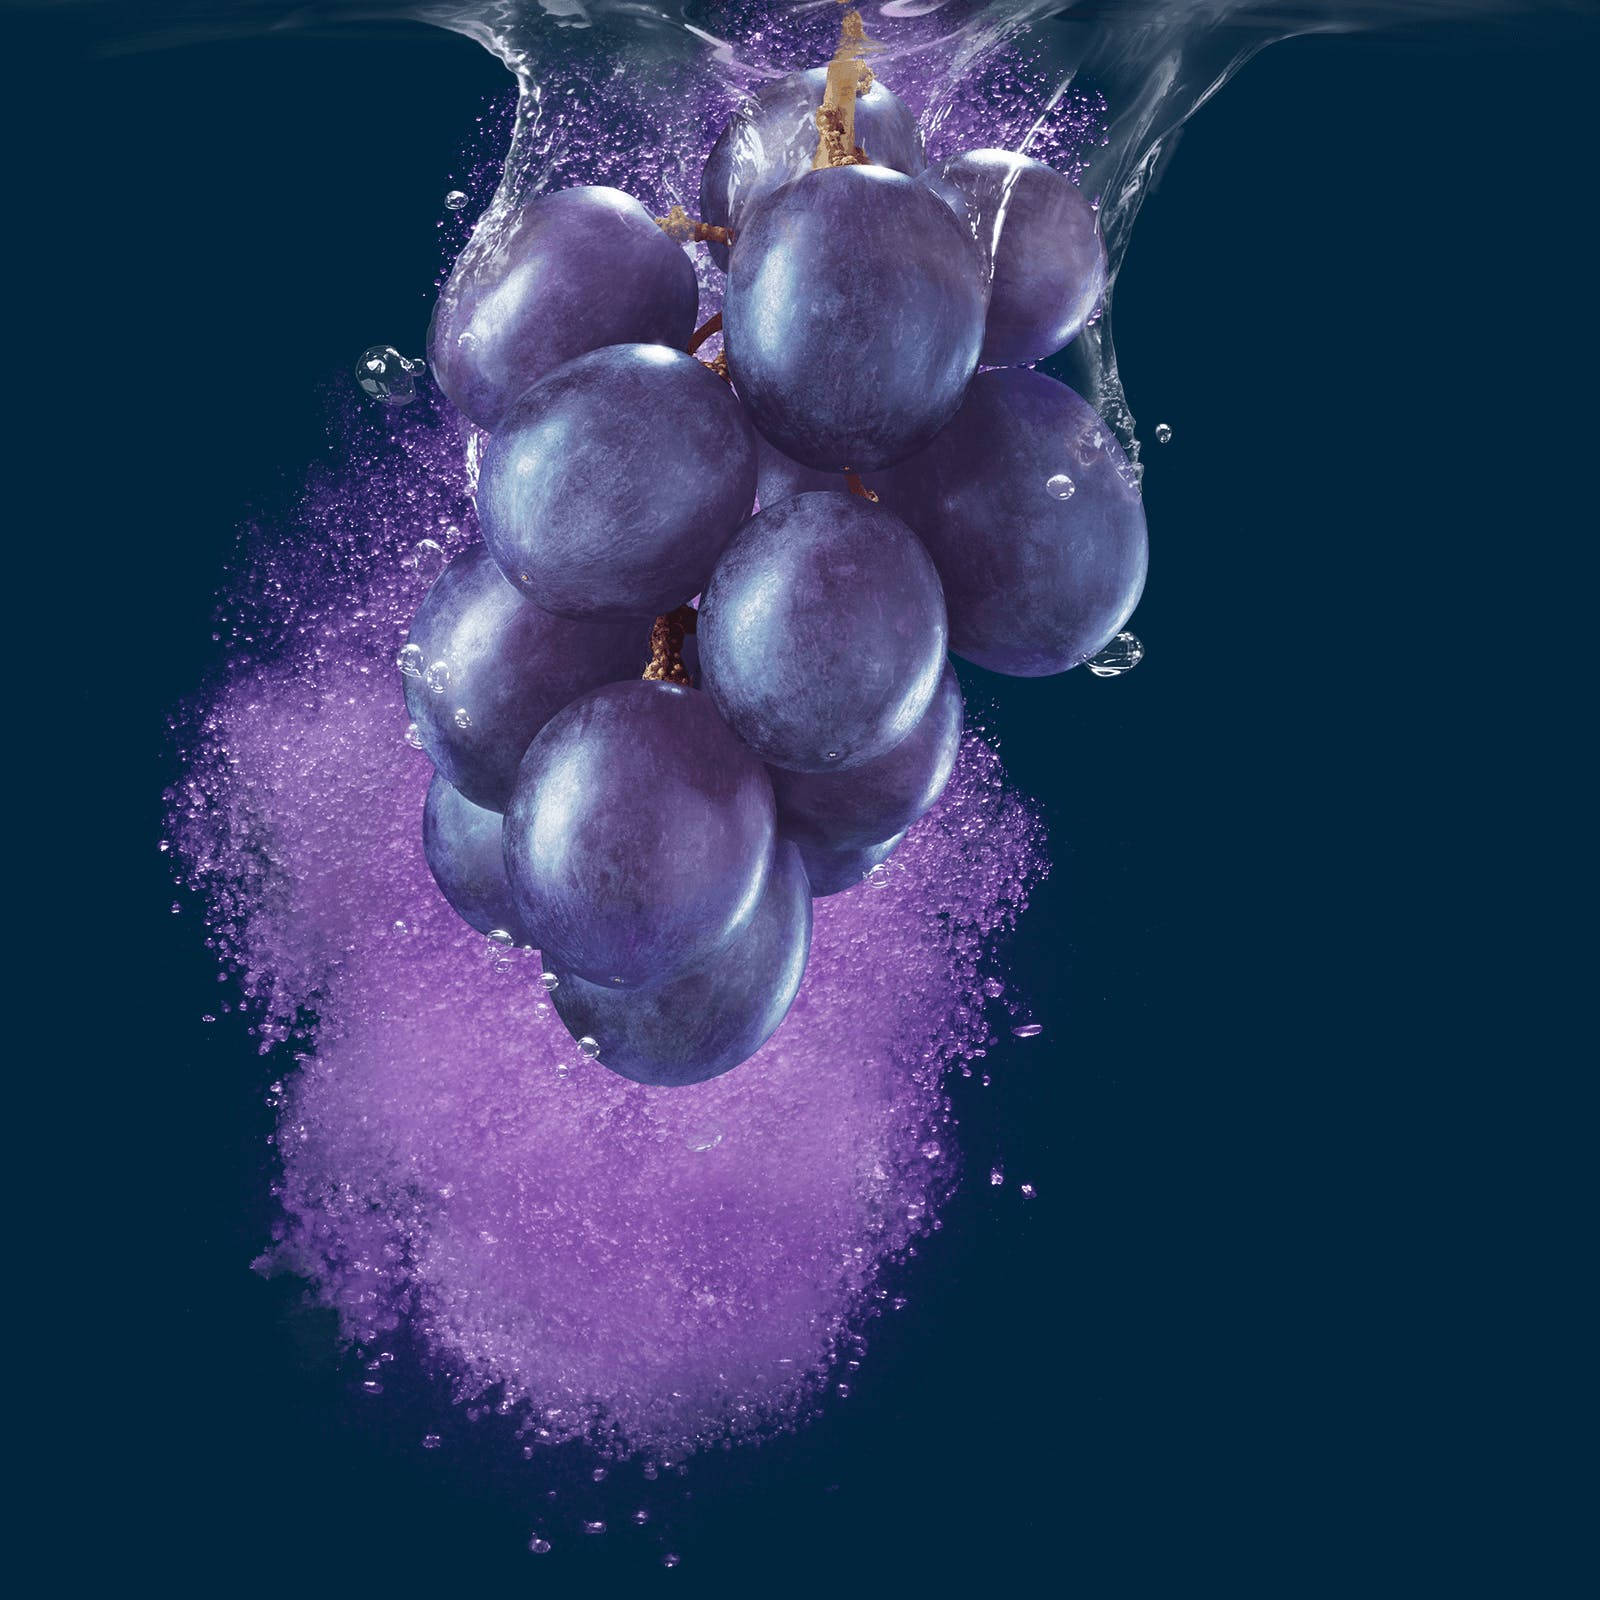 Fresh Grapes Soaked In Water Background